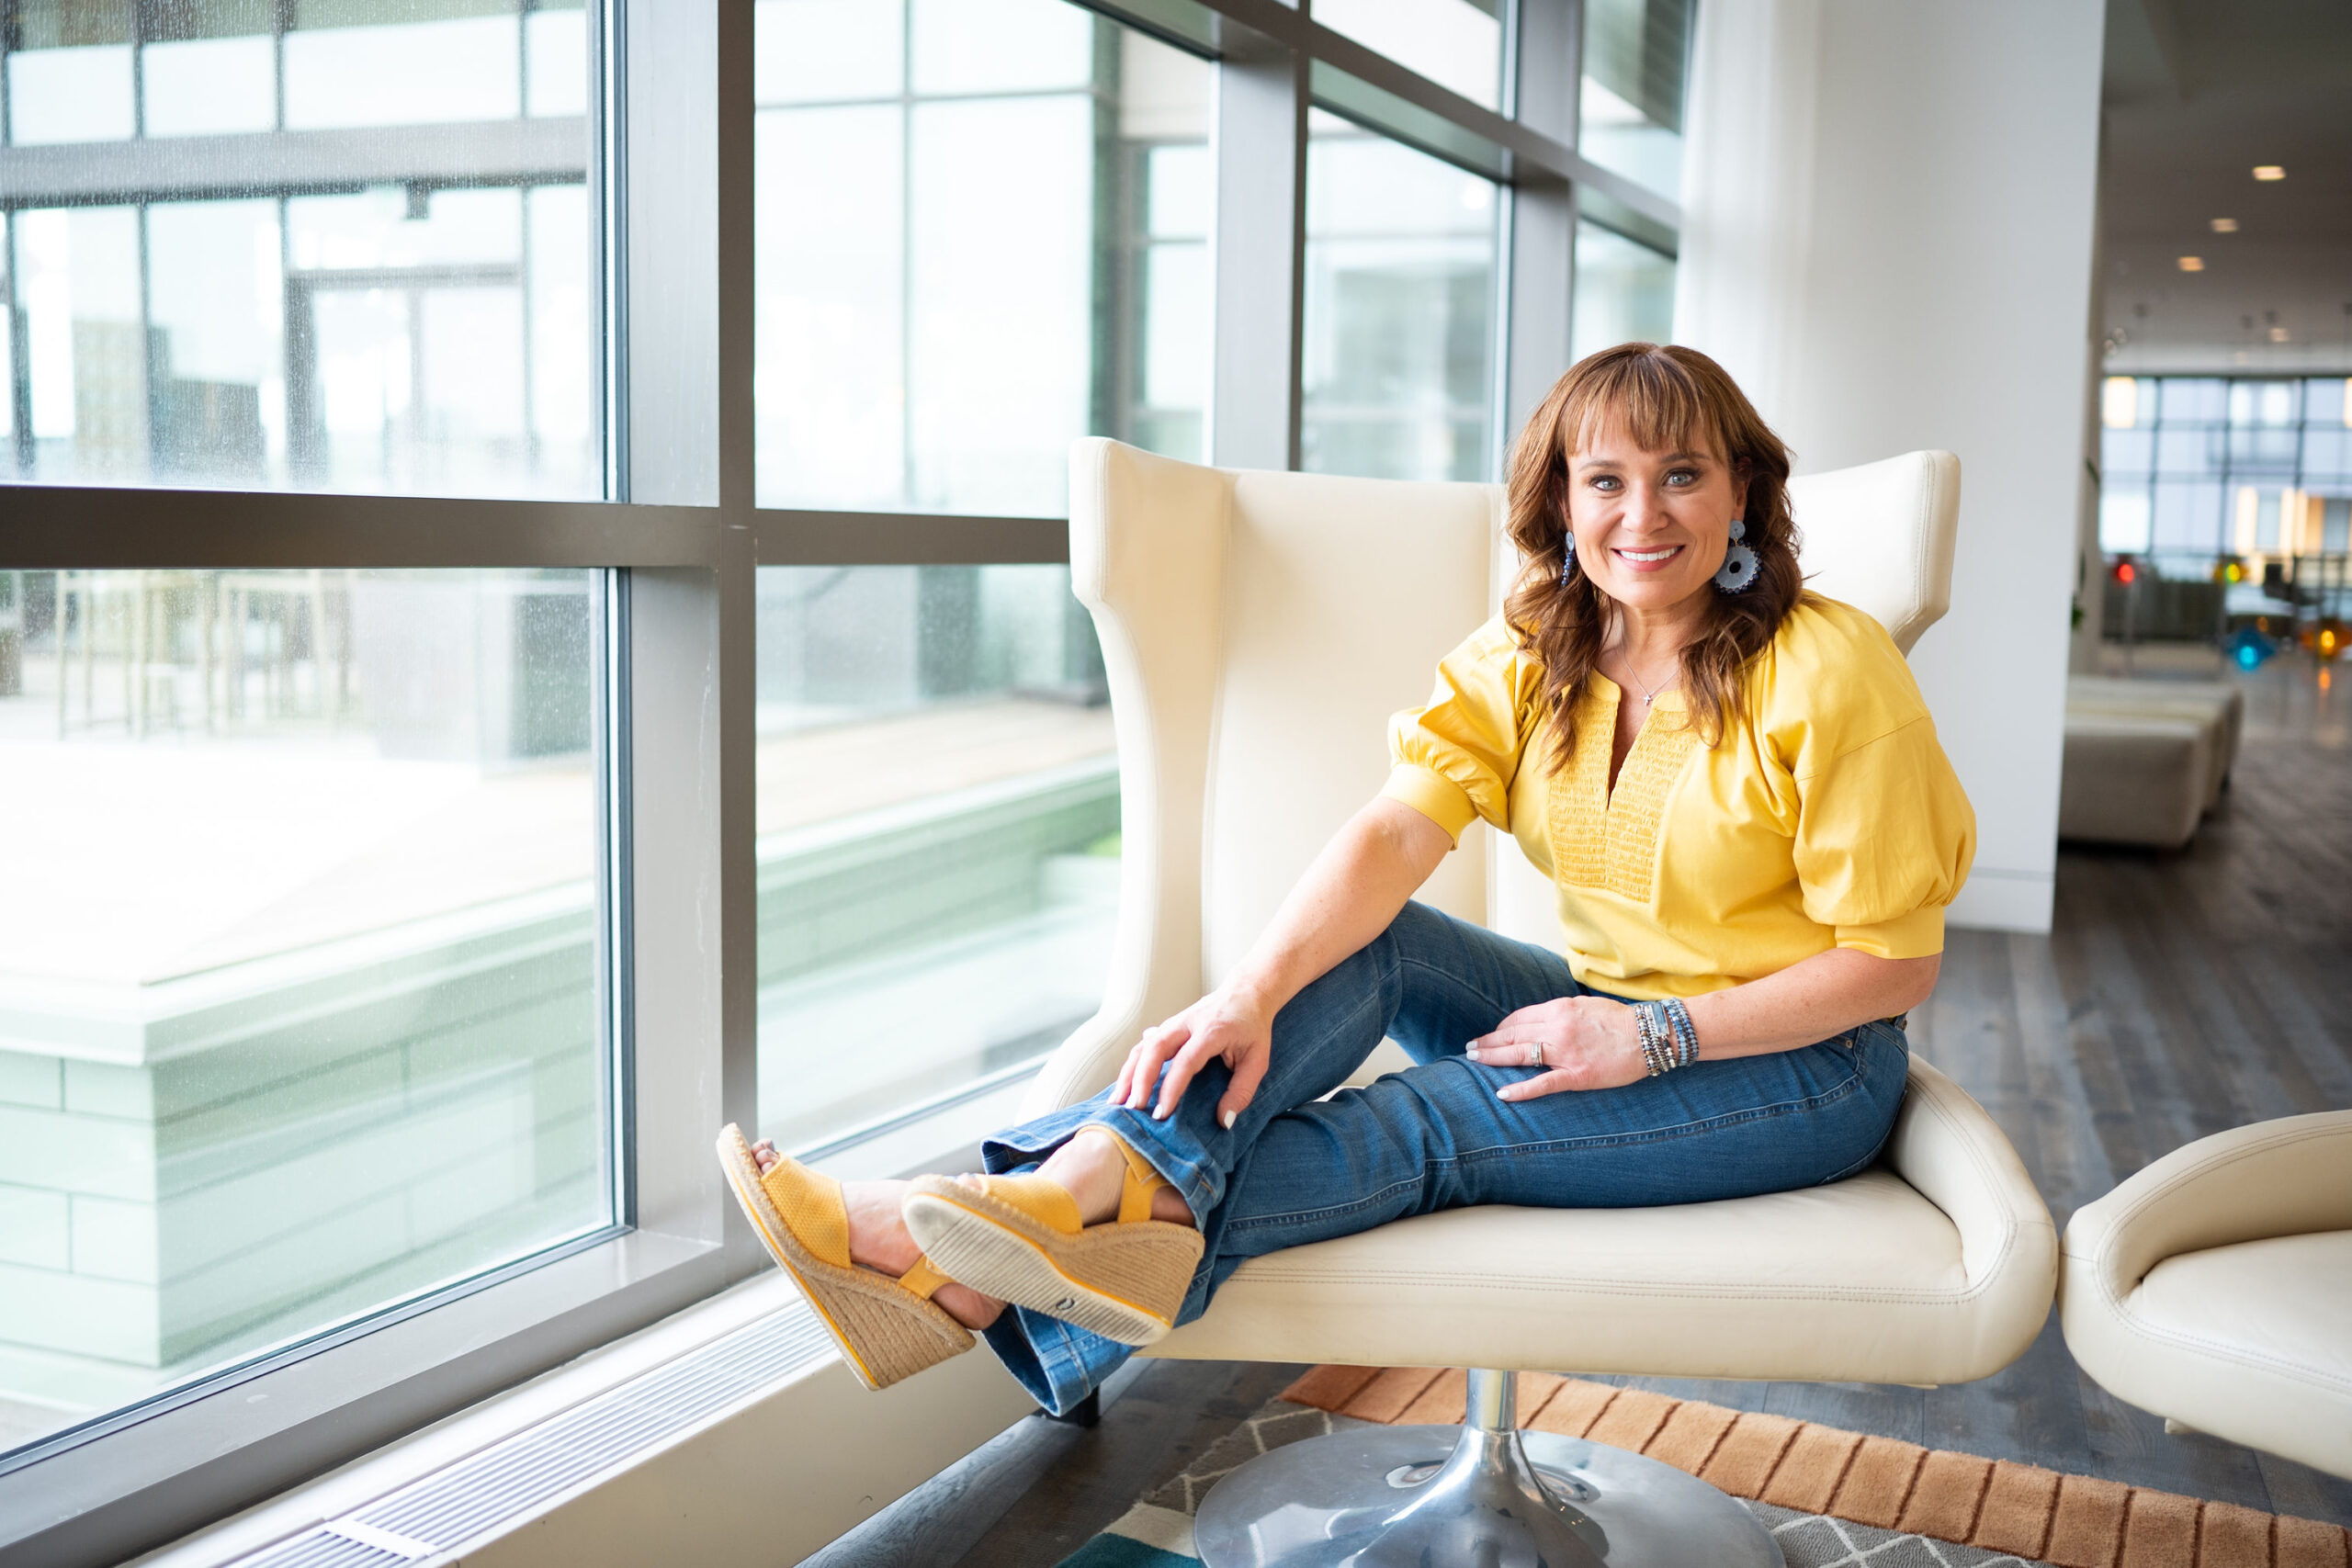 Jennifer wearing a cheerful yellow shirt, sitting in front of a window.